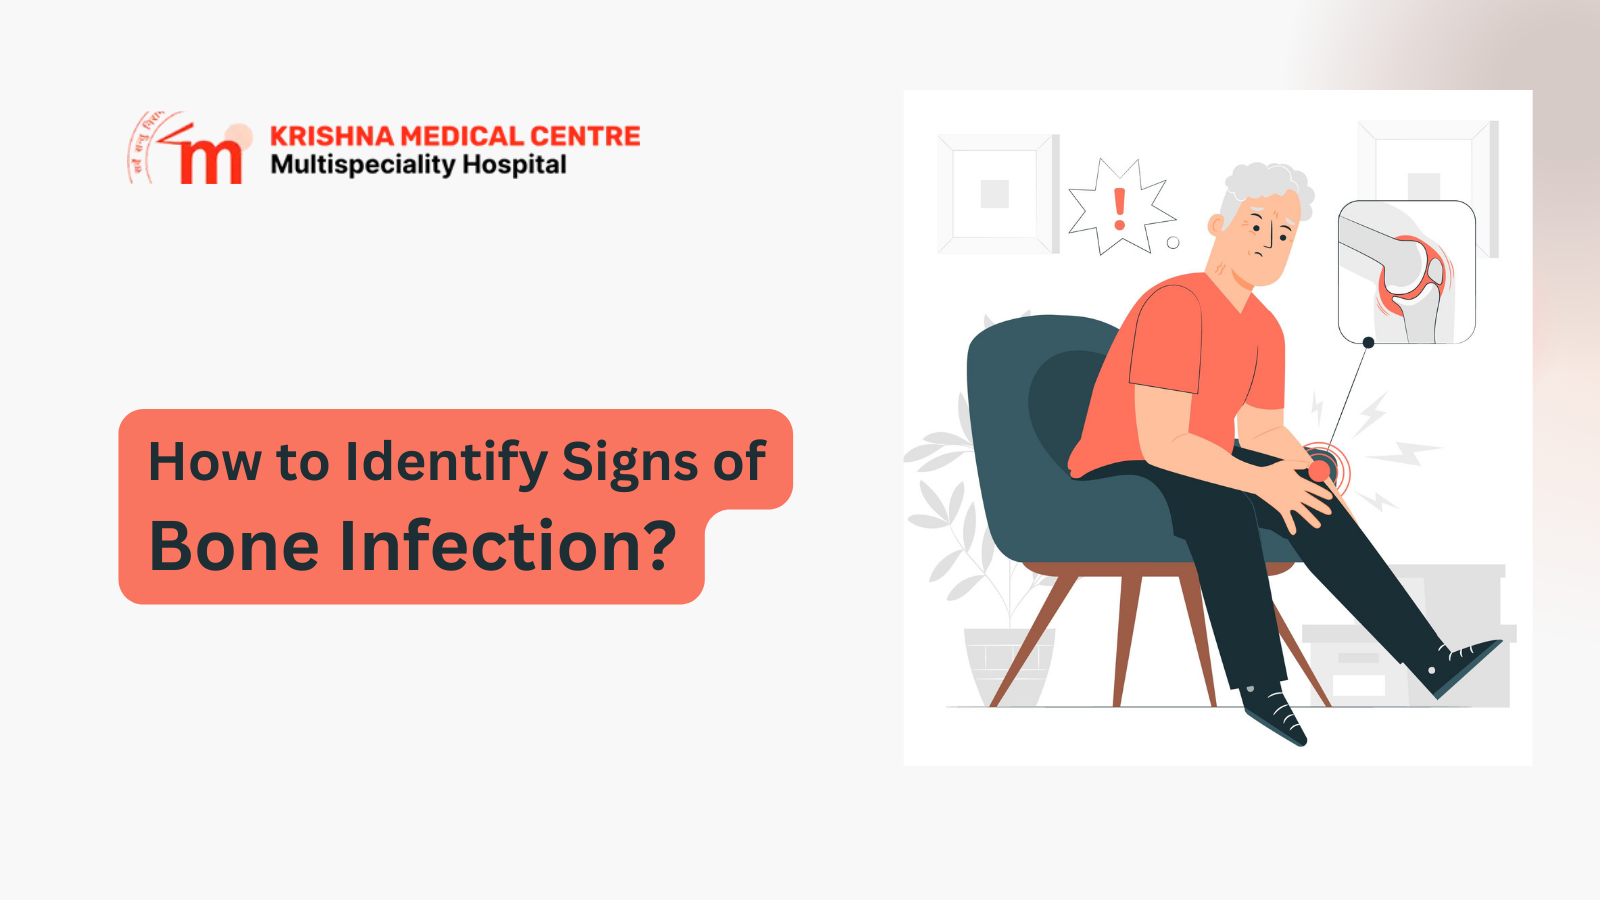 How to Identify Signs of Bone Infection?